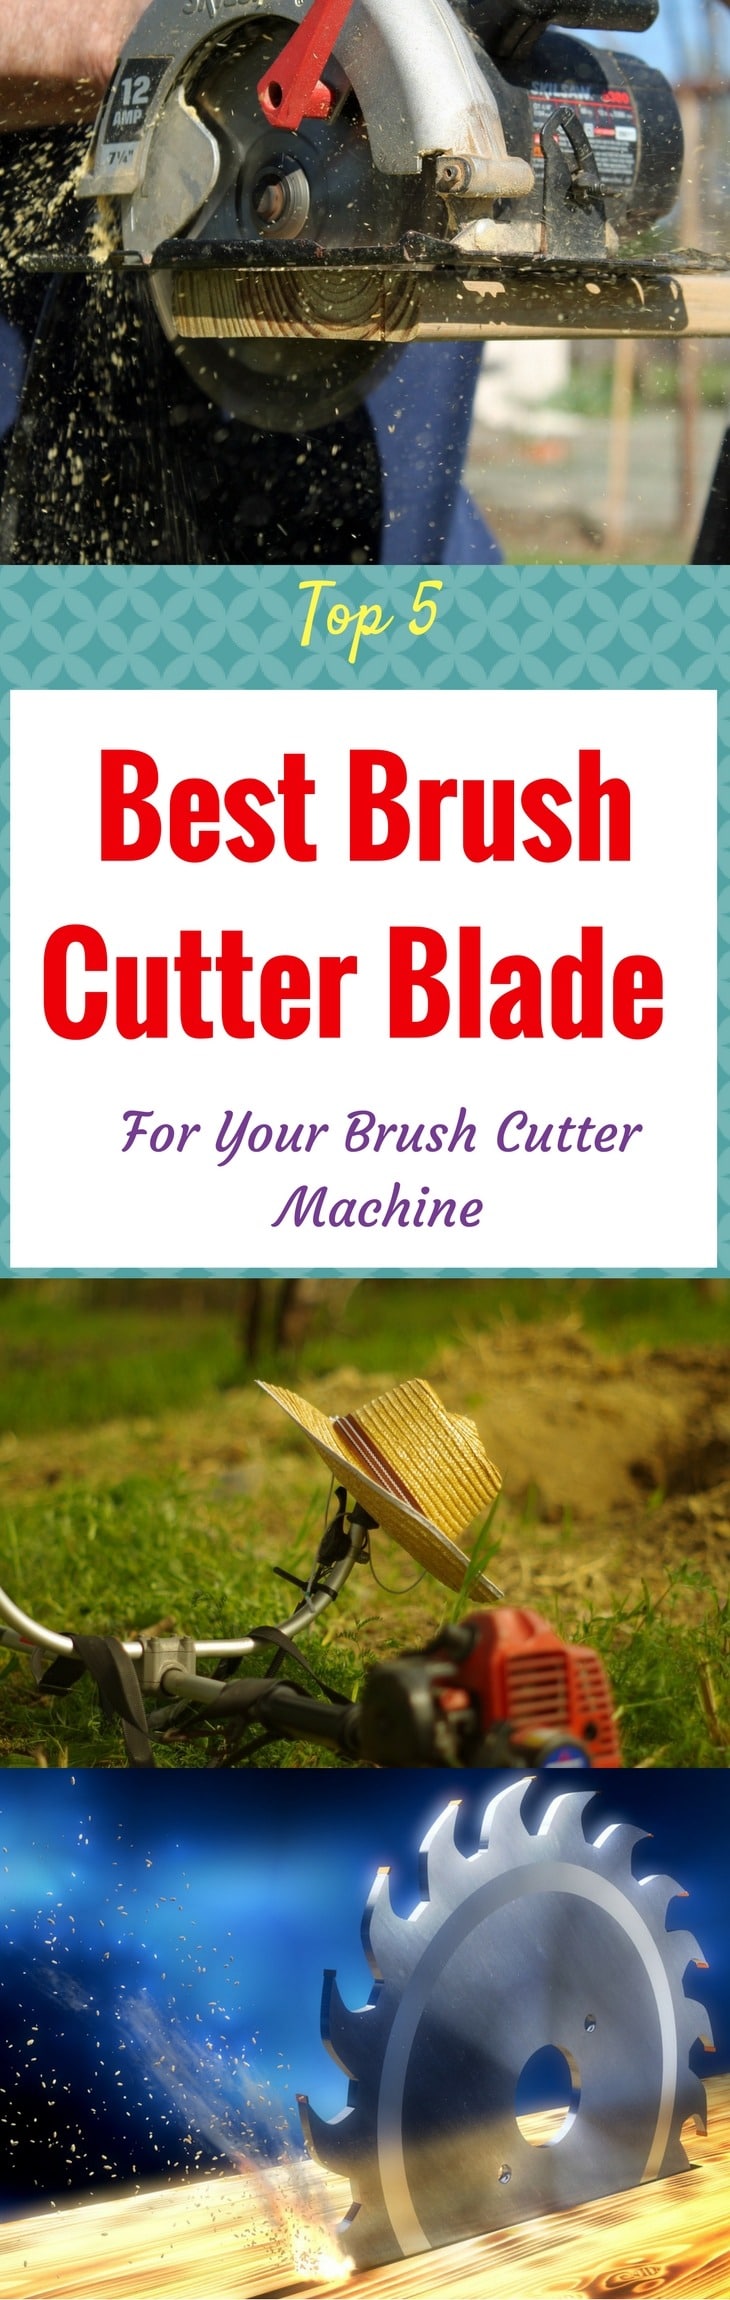 Top 5 Best Brush Cutter Blade For Your Brush Cutter Machine